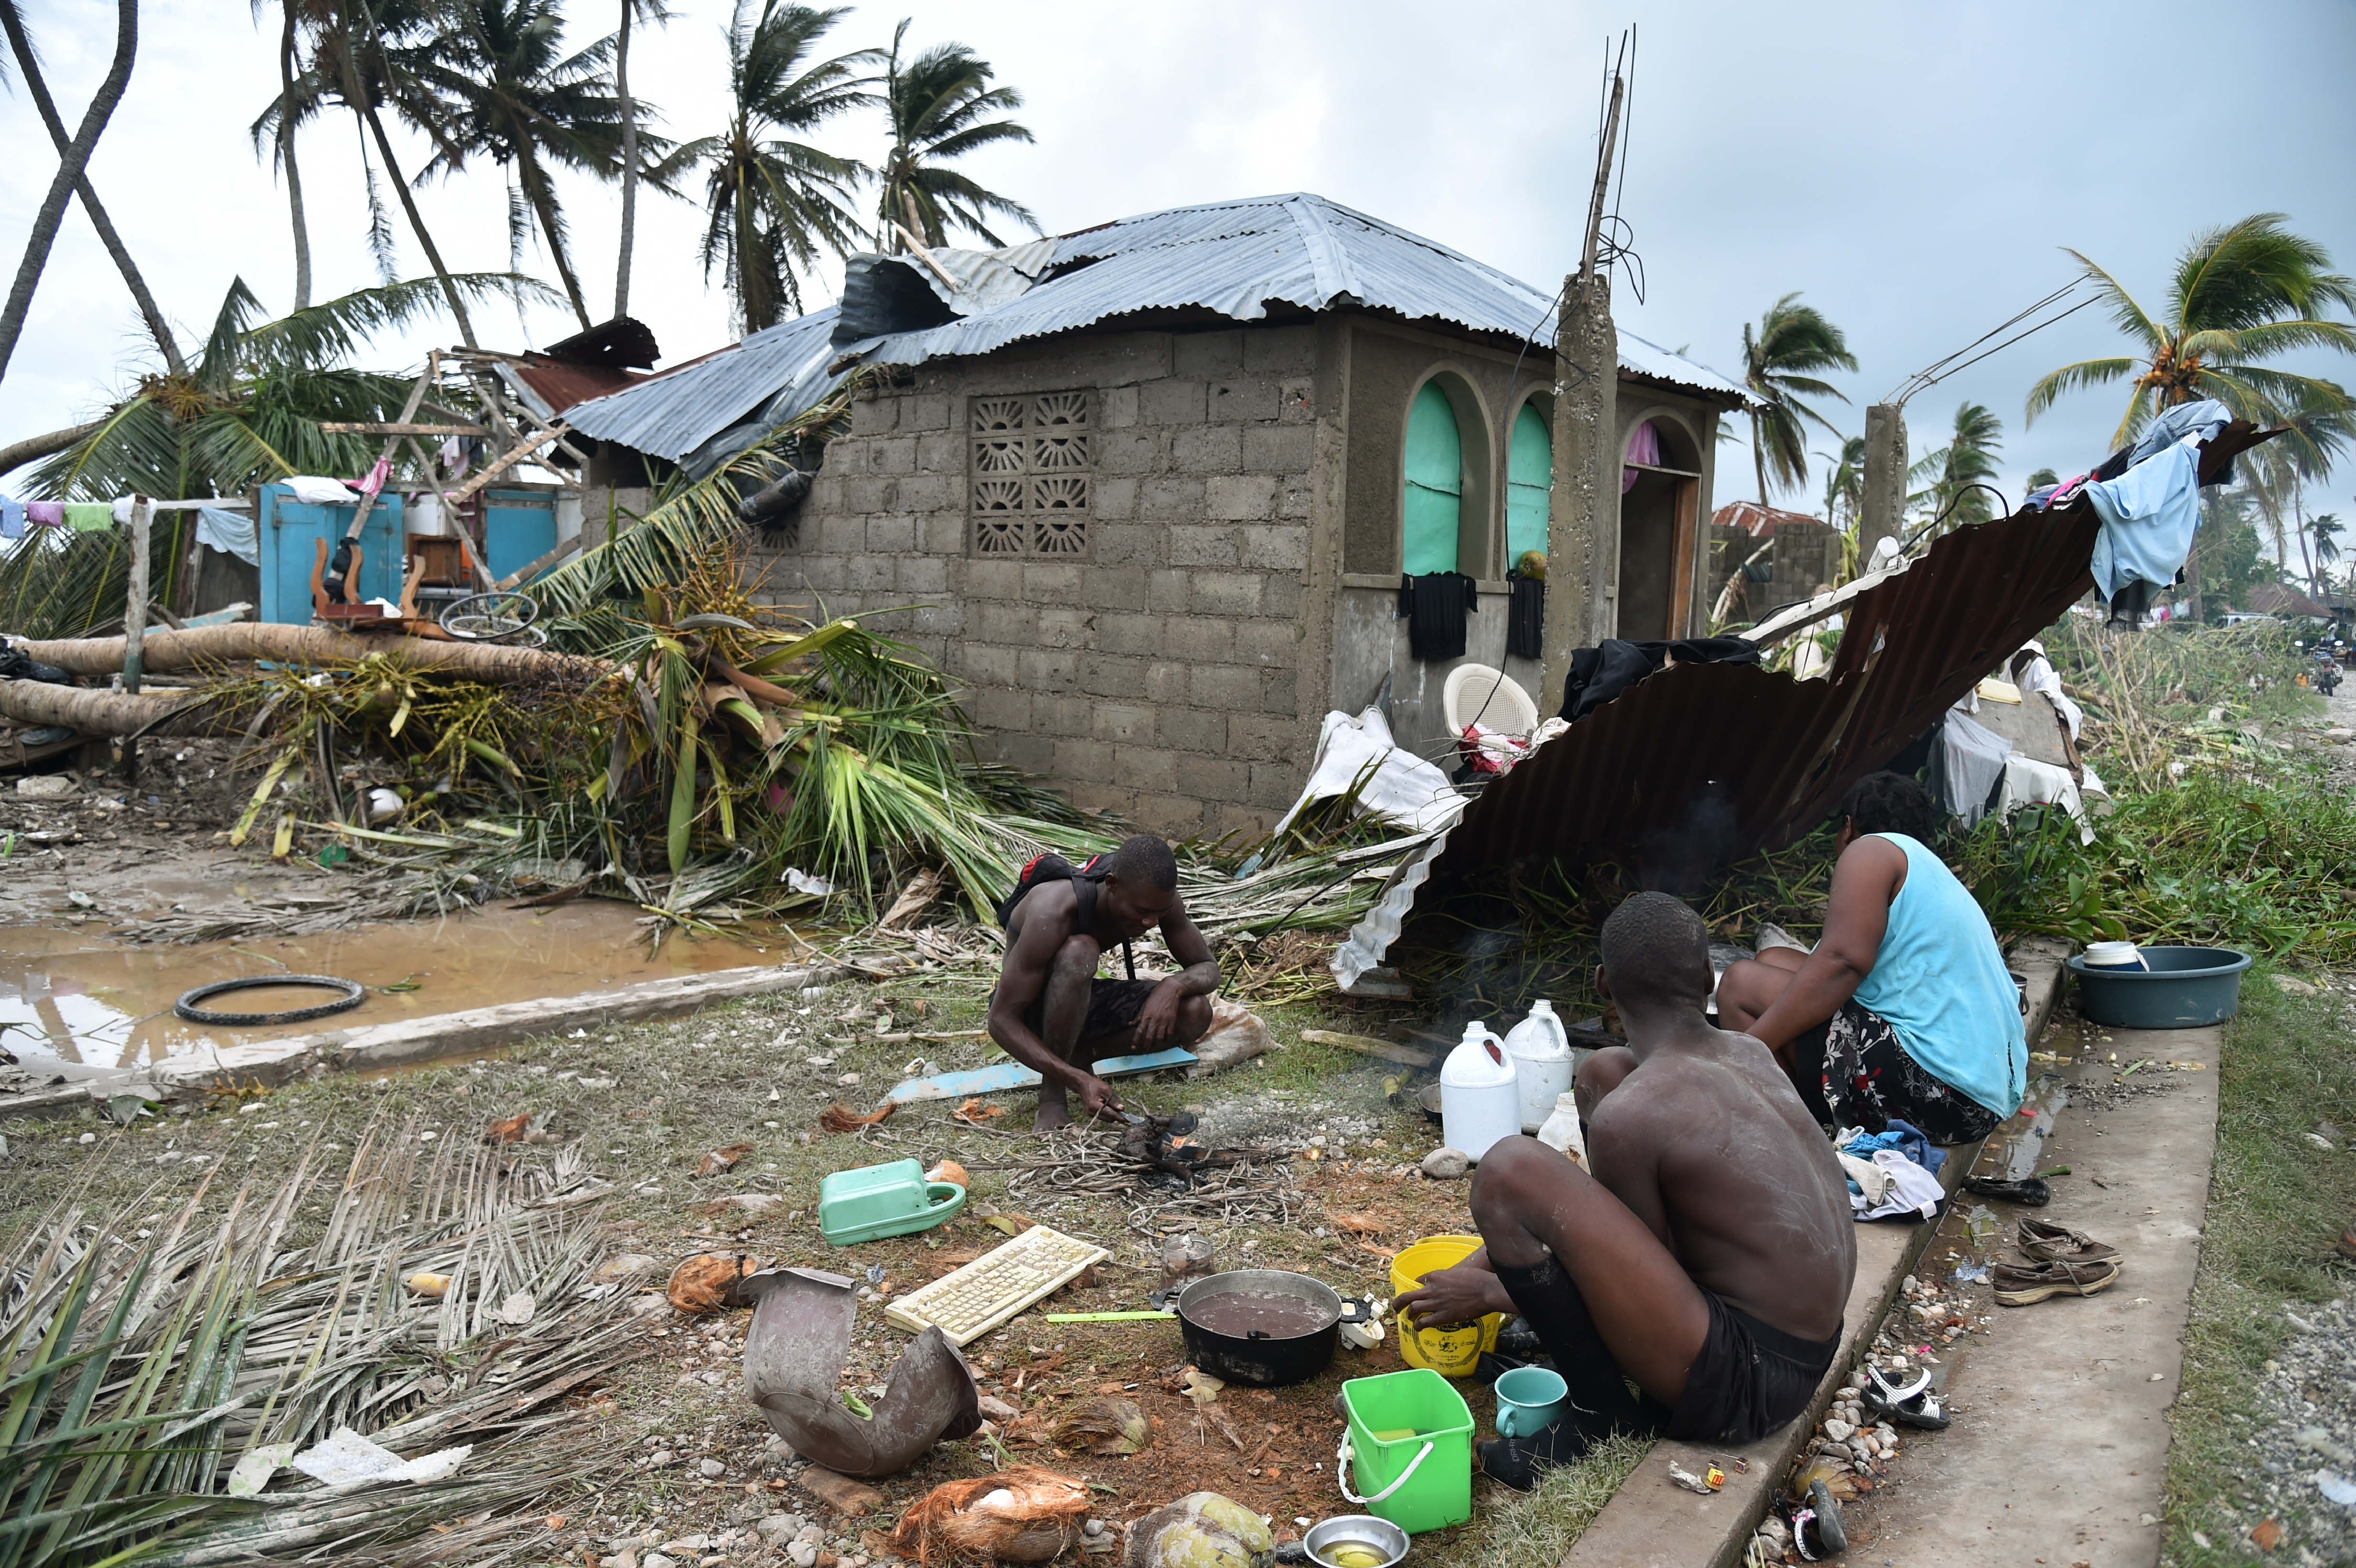 A family prepares food in front of a destroyed house after Hurricane Matthew, in Croix Marche-a-Terre, in Southwest Haiti, on October 6, 2016. The storm killed at least 108 people in Haiti, the poorest country in the Americas, with the final toll expected to be much higher. / AFP PHOTO / HECTOR RETAMAL